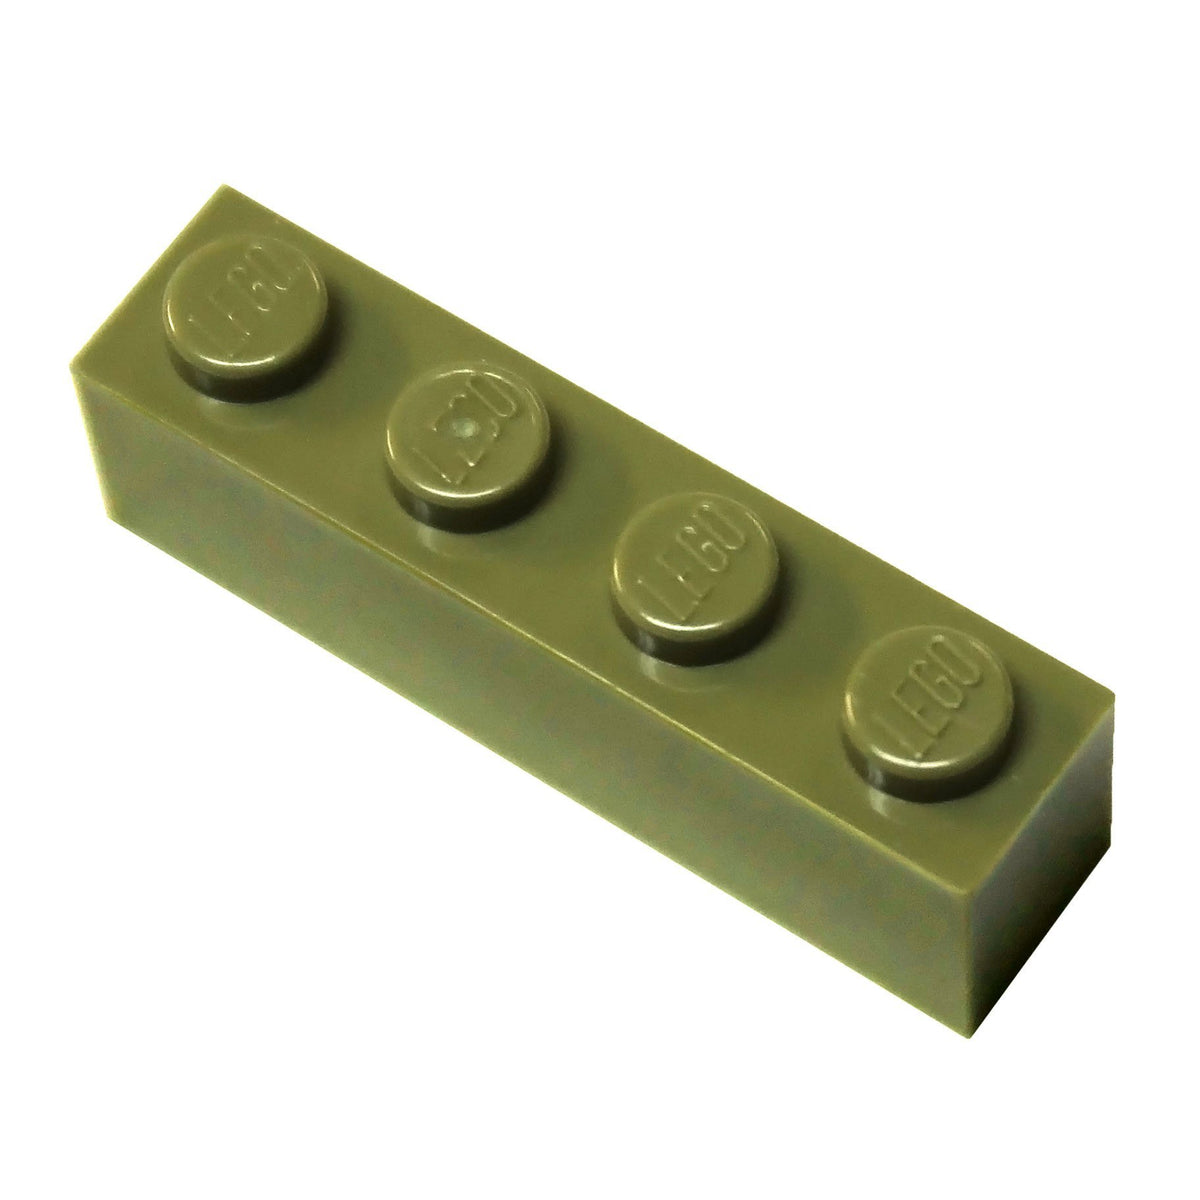 LEGO Parts and Pieces: Olive Green 1x4 Brick x20